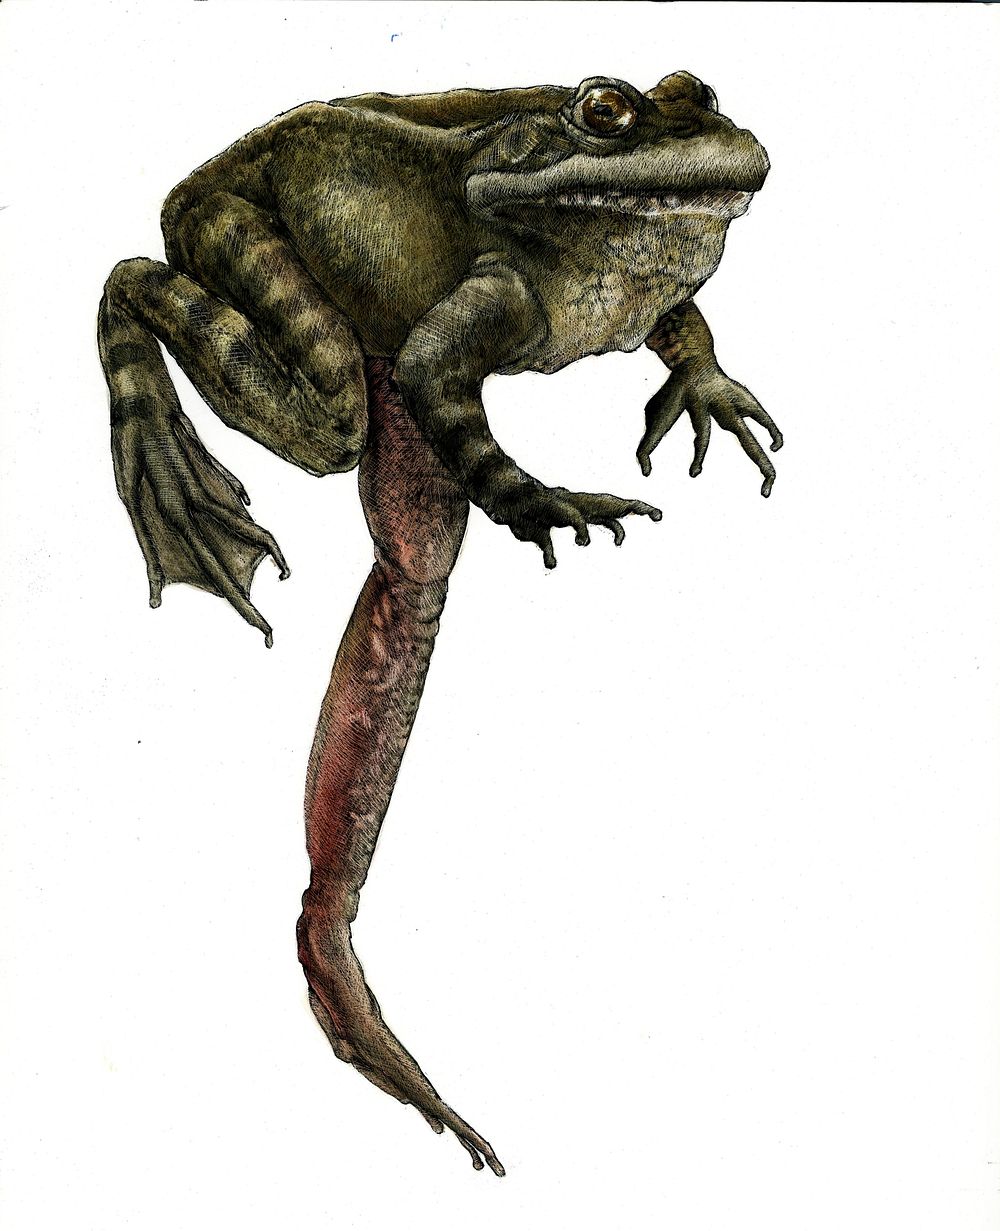 Red-legged frog jumping colored pencil drawing. Original public domain image from Flickr